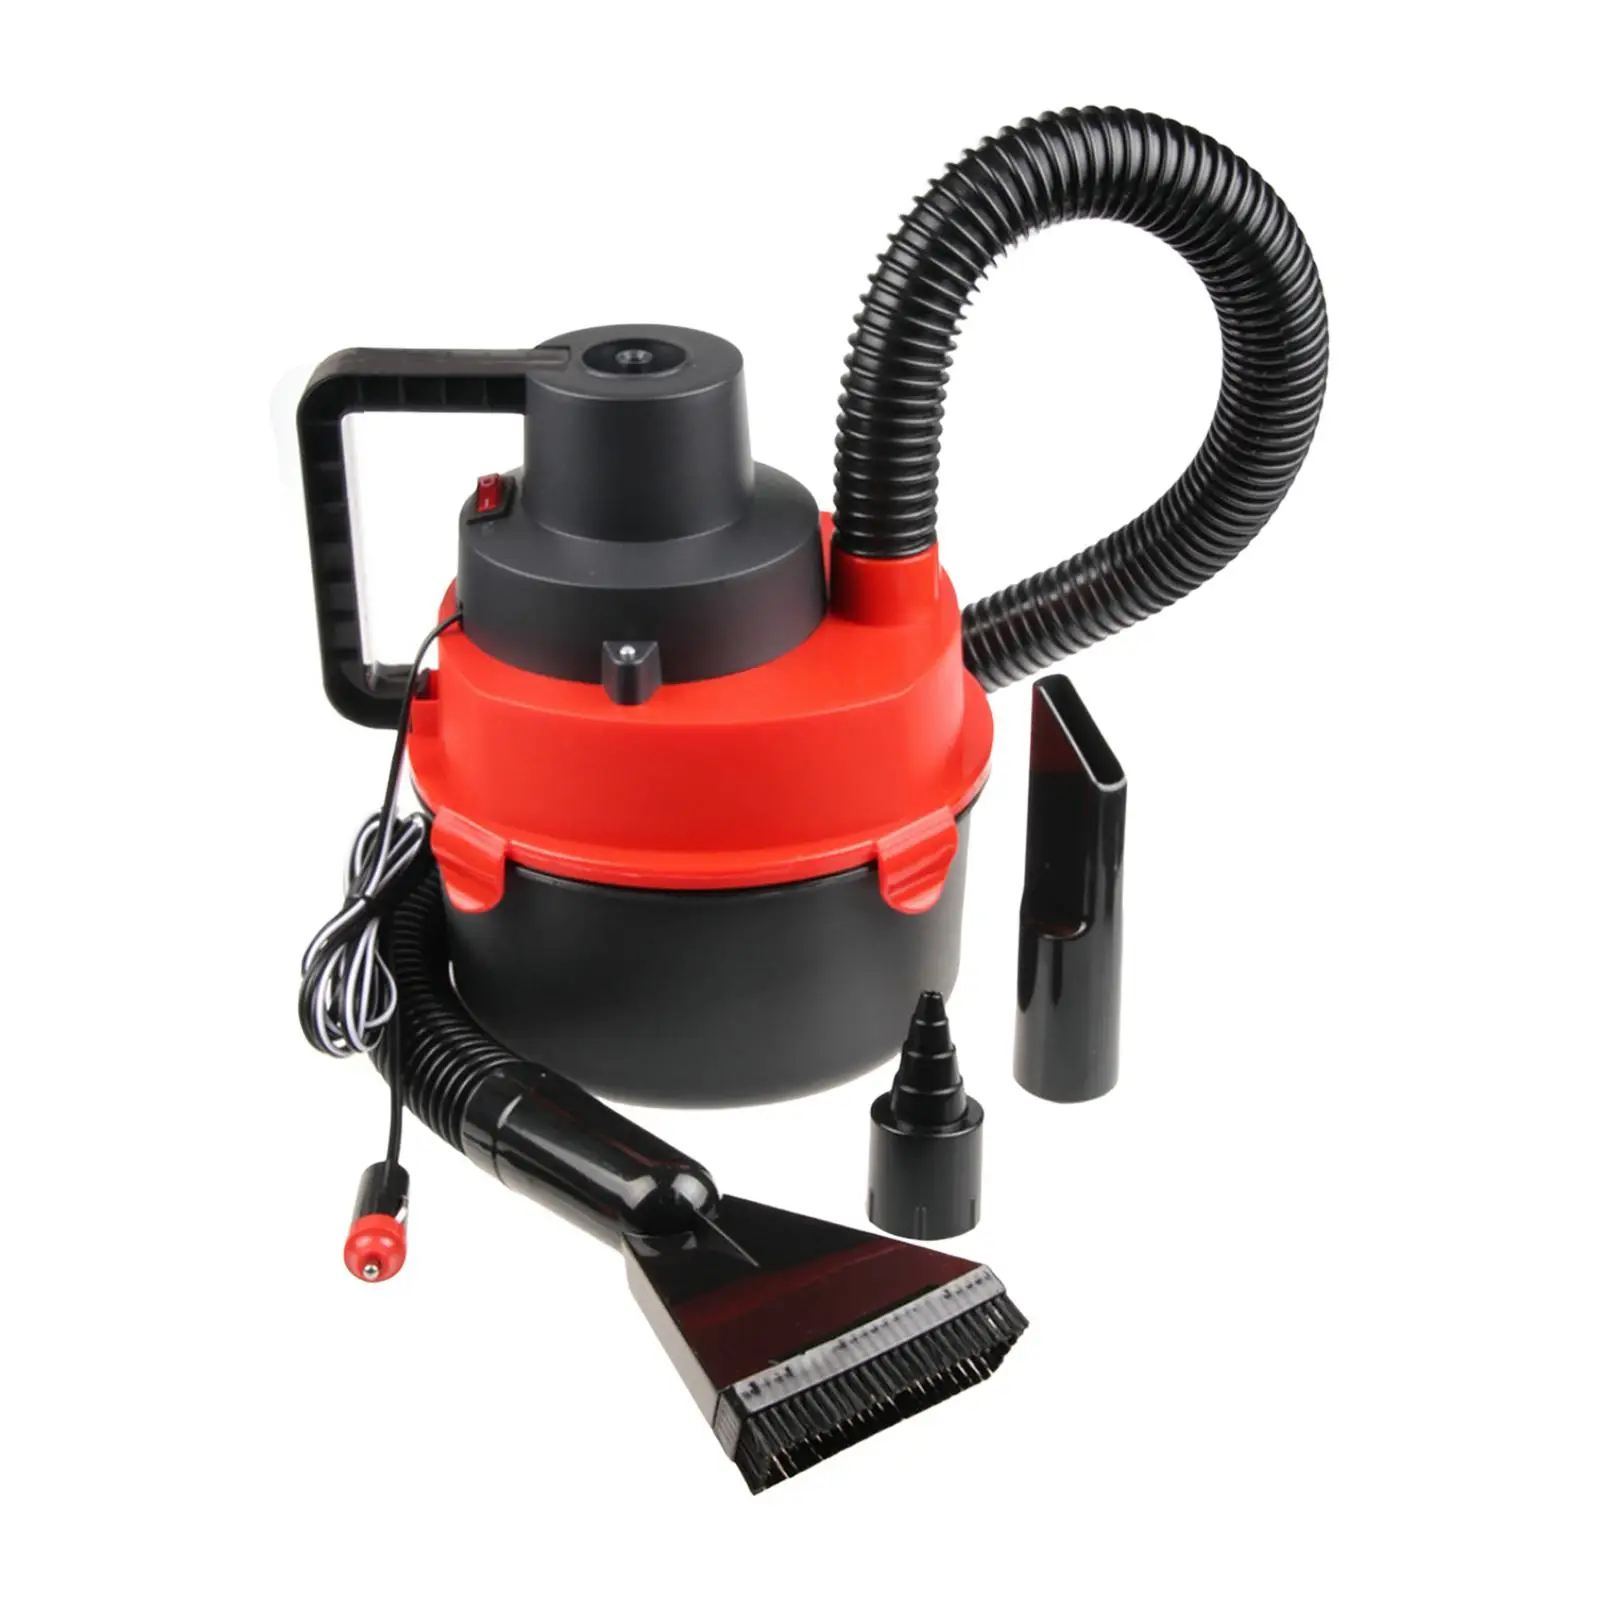 12V Wet/Dry Car Canister Vacuum for Truck Van 3 Nozzle Attachments Portable